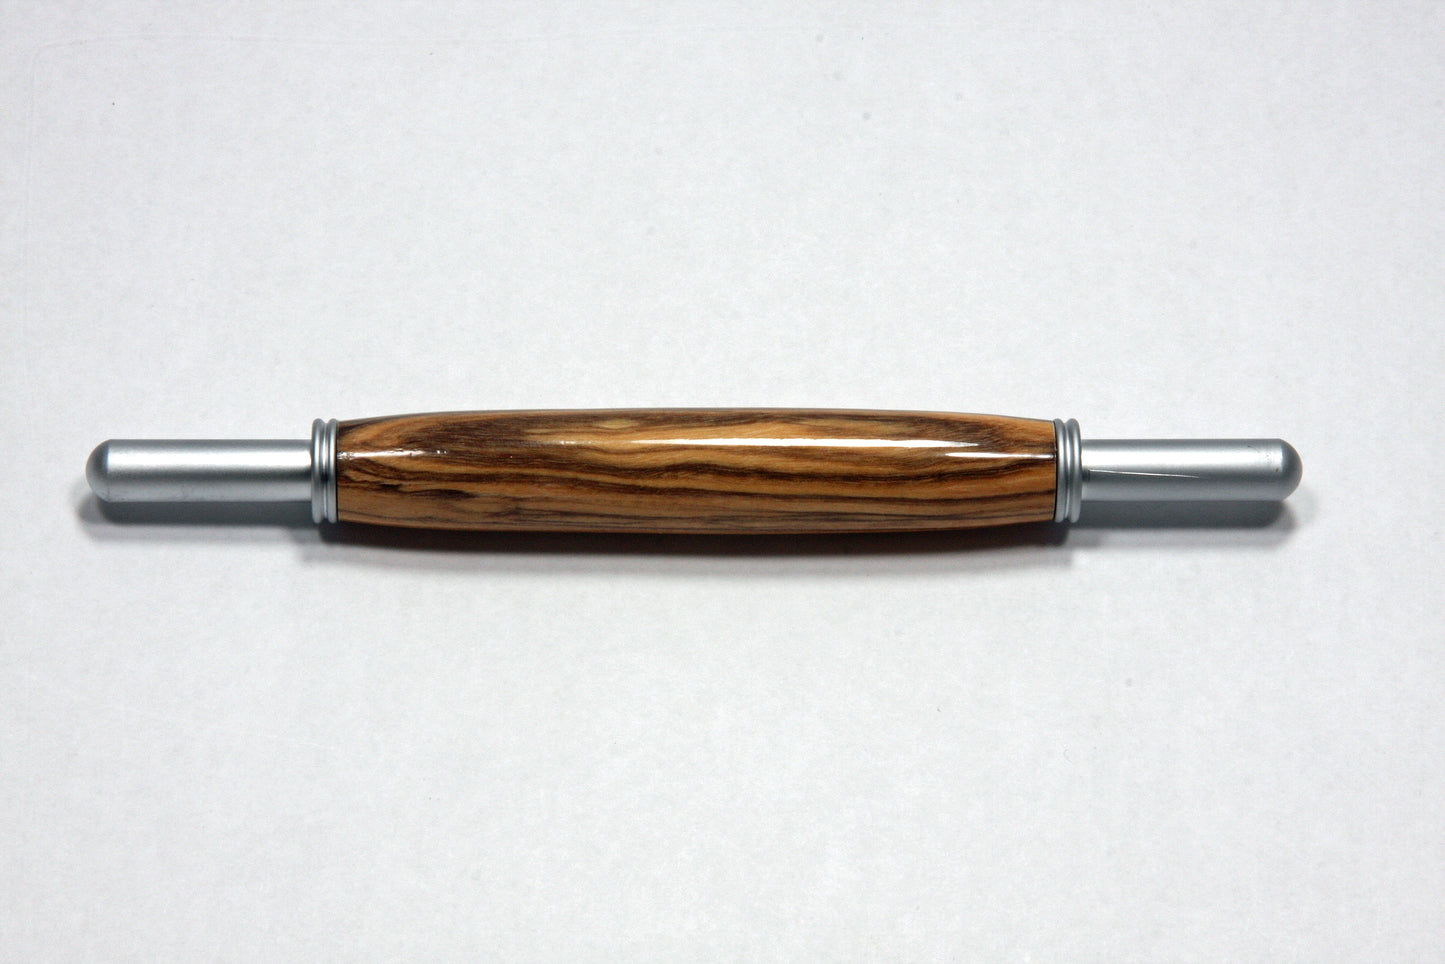 Handcrafted Olivewood Double-Bladed Seam Ripper - Perfect Gift for Seamstresses and Crafters